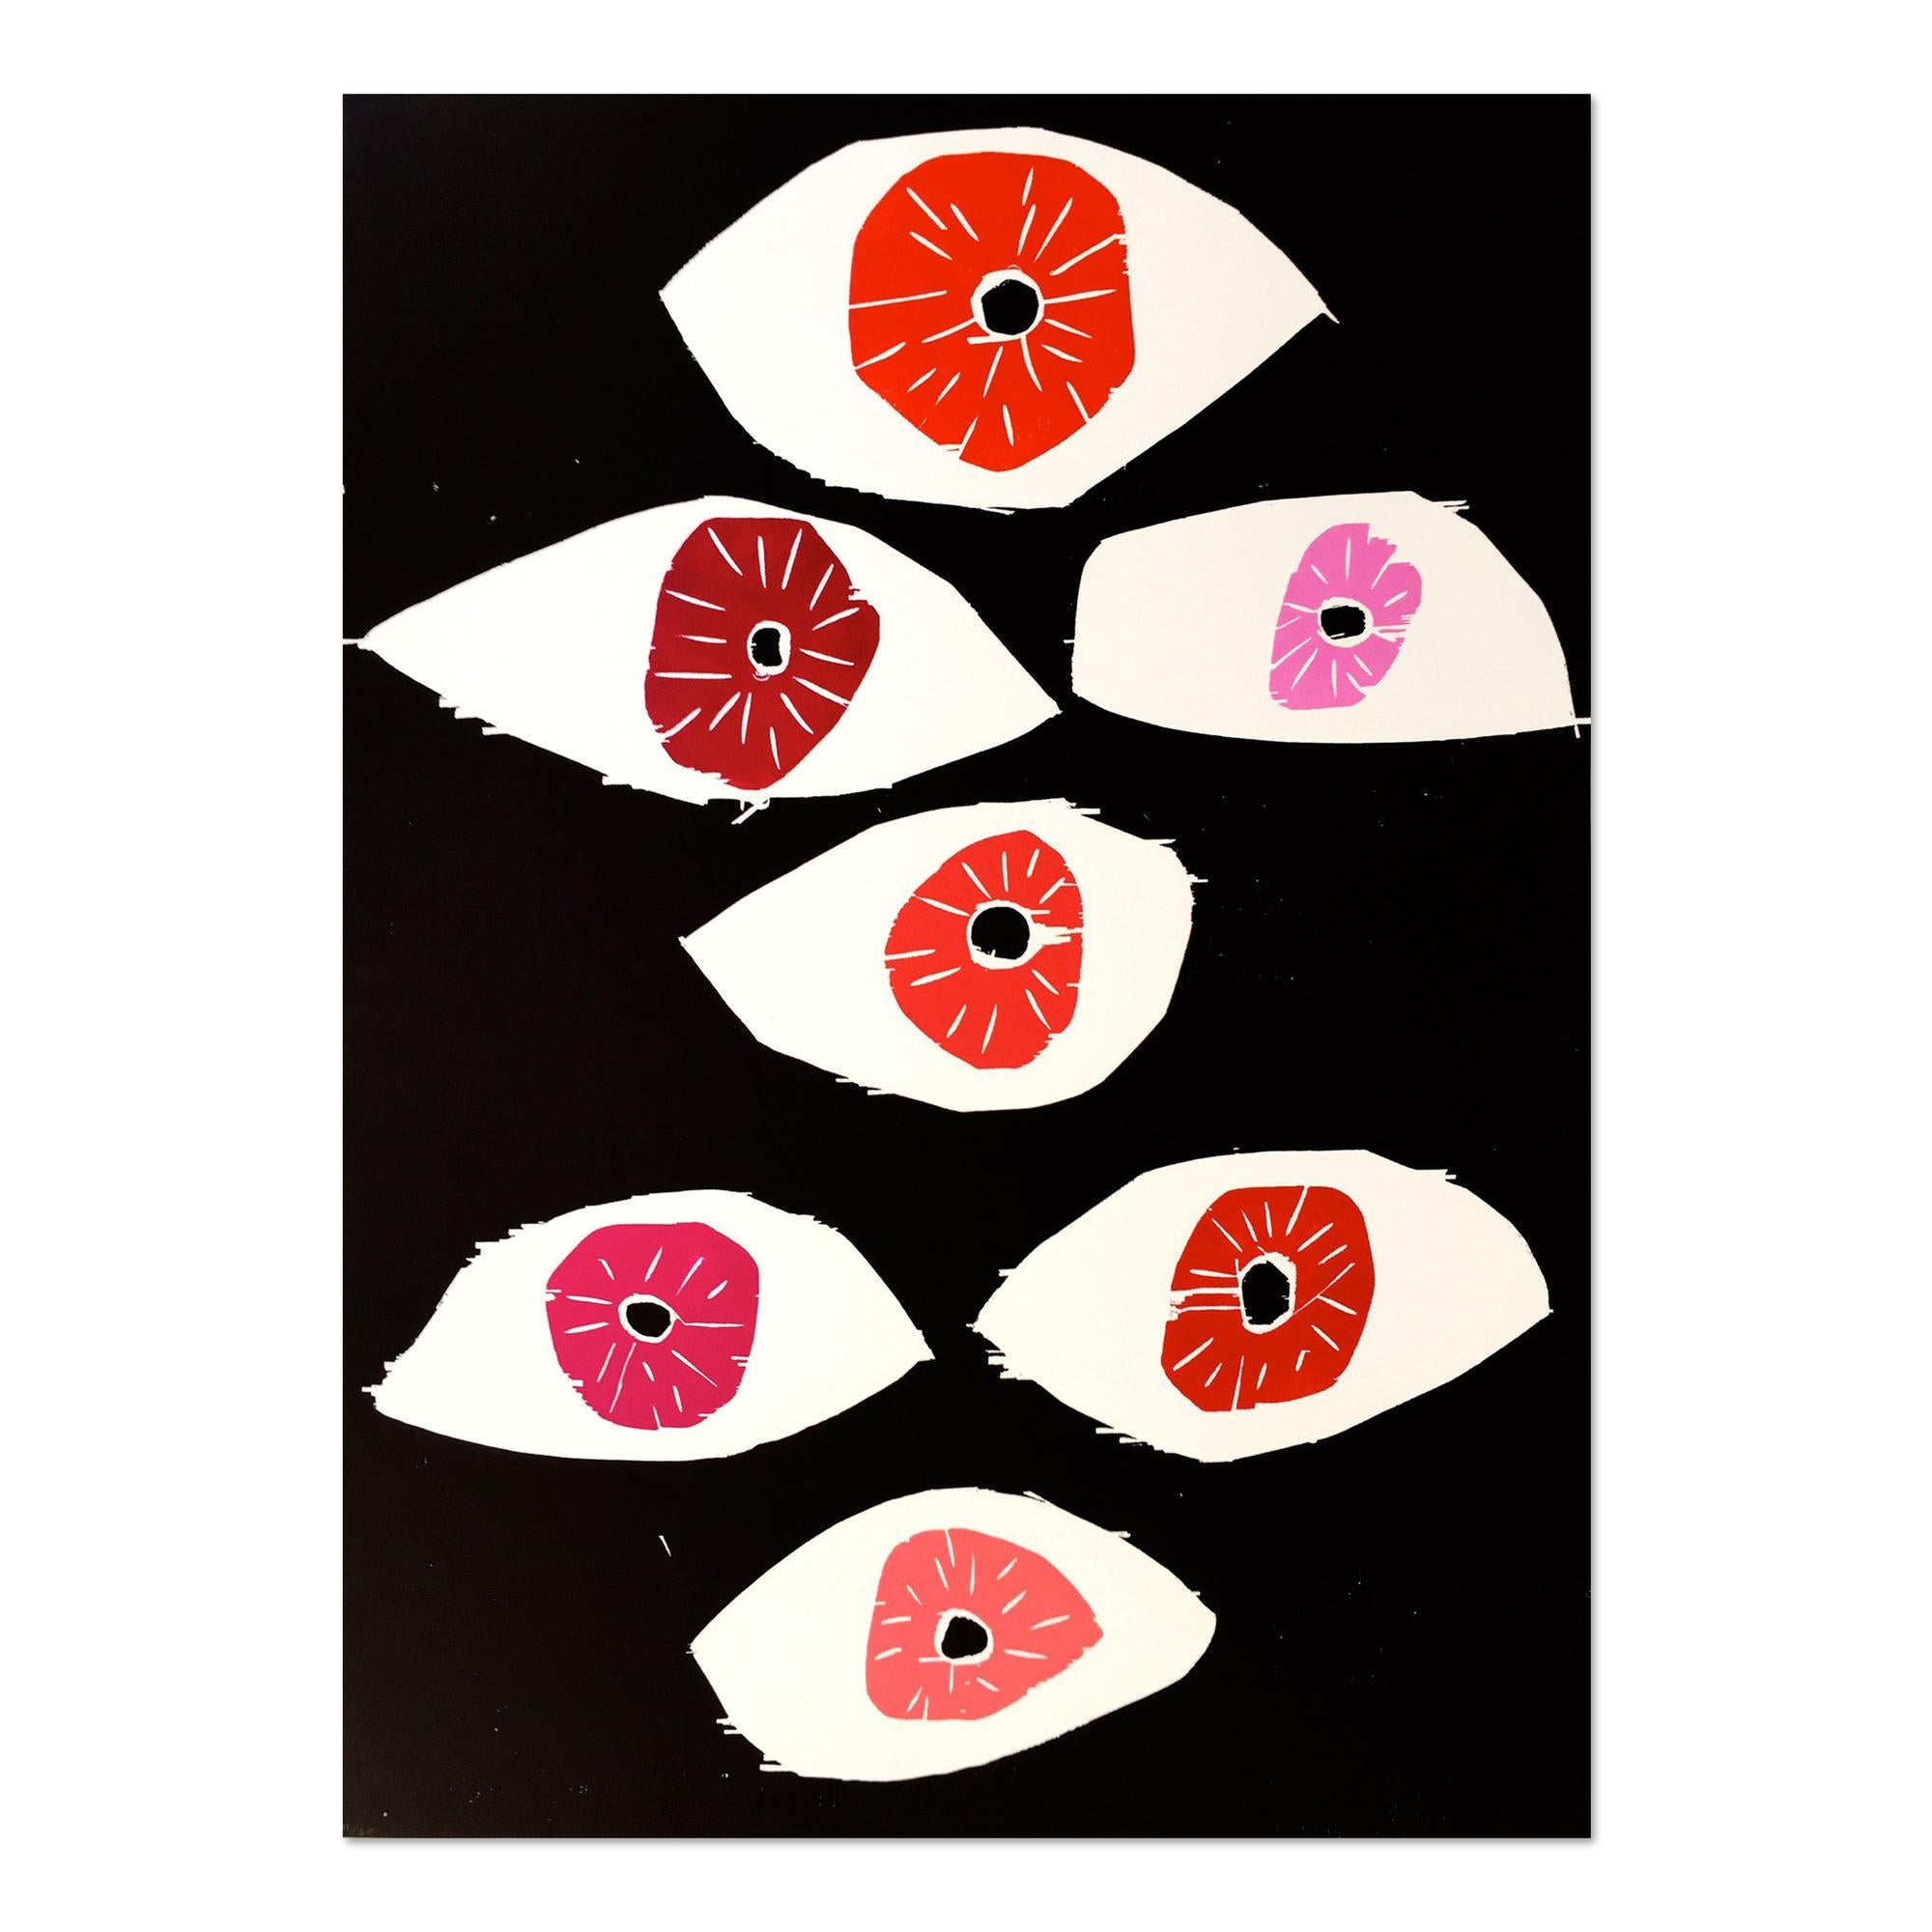 David Shrigley (English, b. 1968)
Eyes, 2016
Medium: Woodcut on paper
Dimensions: 70 x 50 cm
Edition of 20: Hand signed and numbered
Condition: Mint